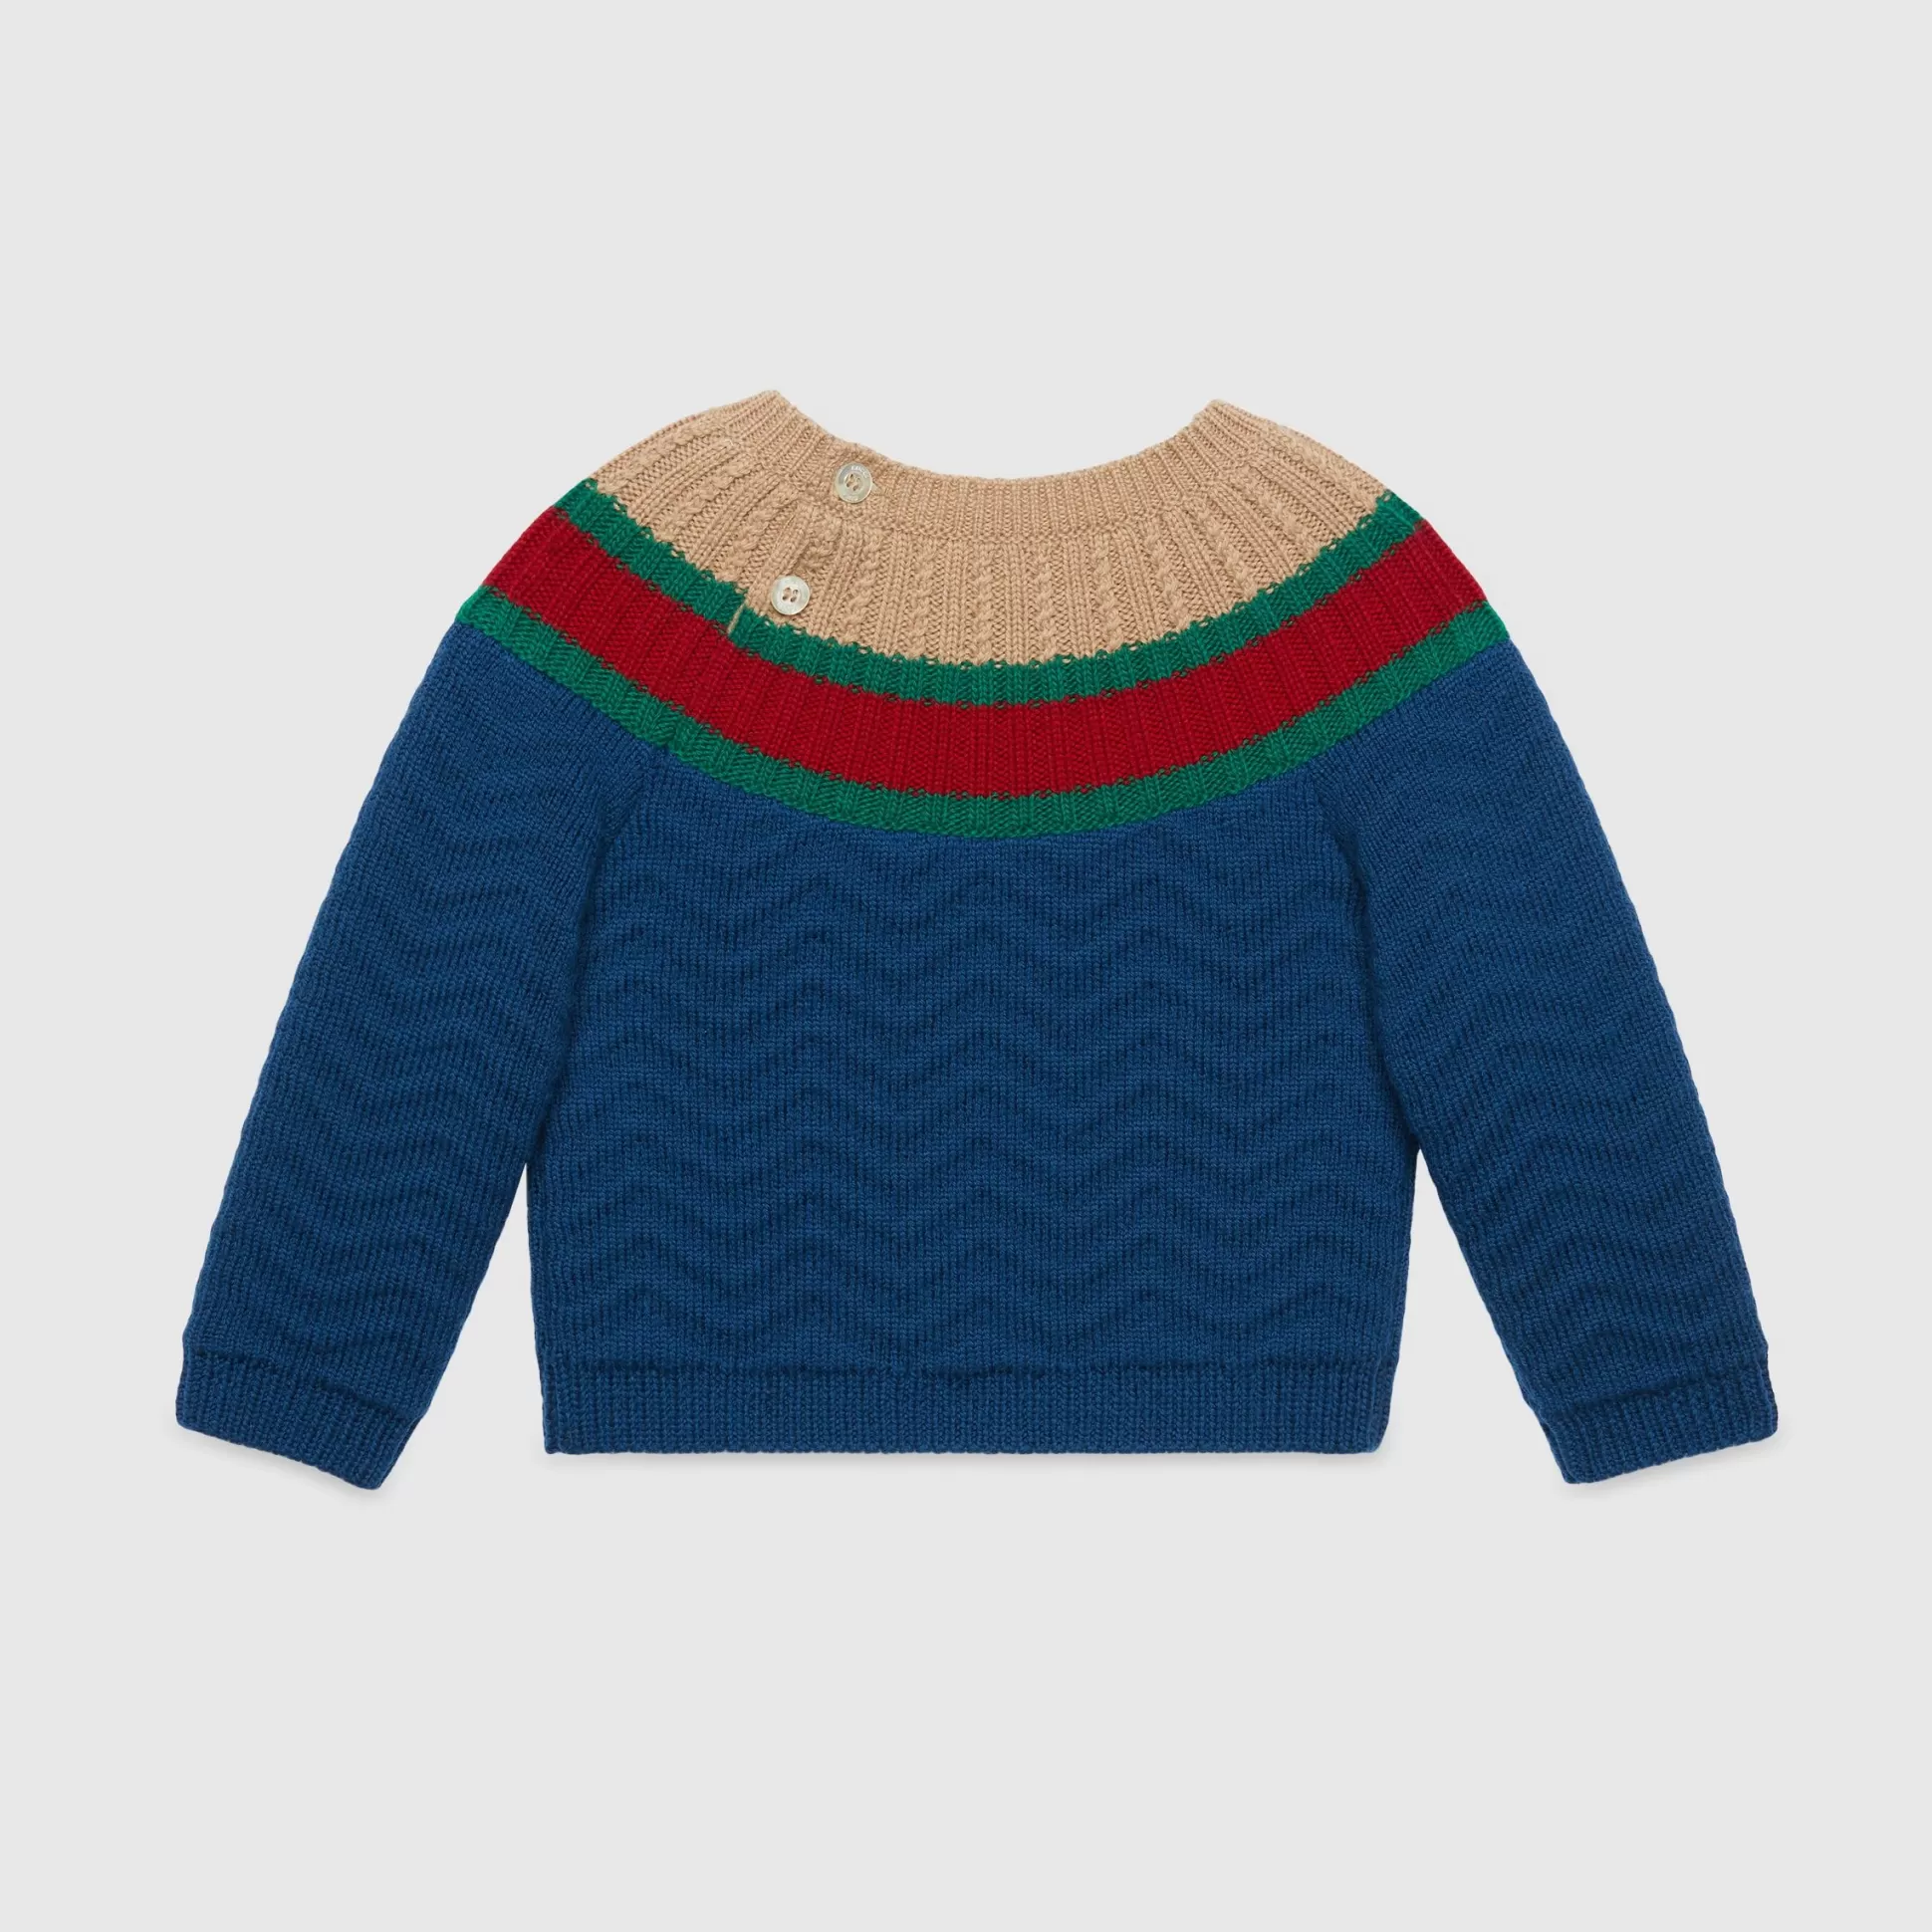 GUCCI Baby Cable Stitch Rib Wool Sweater-Children Boys (0-36 Months)